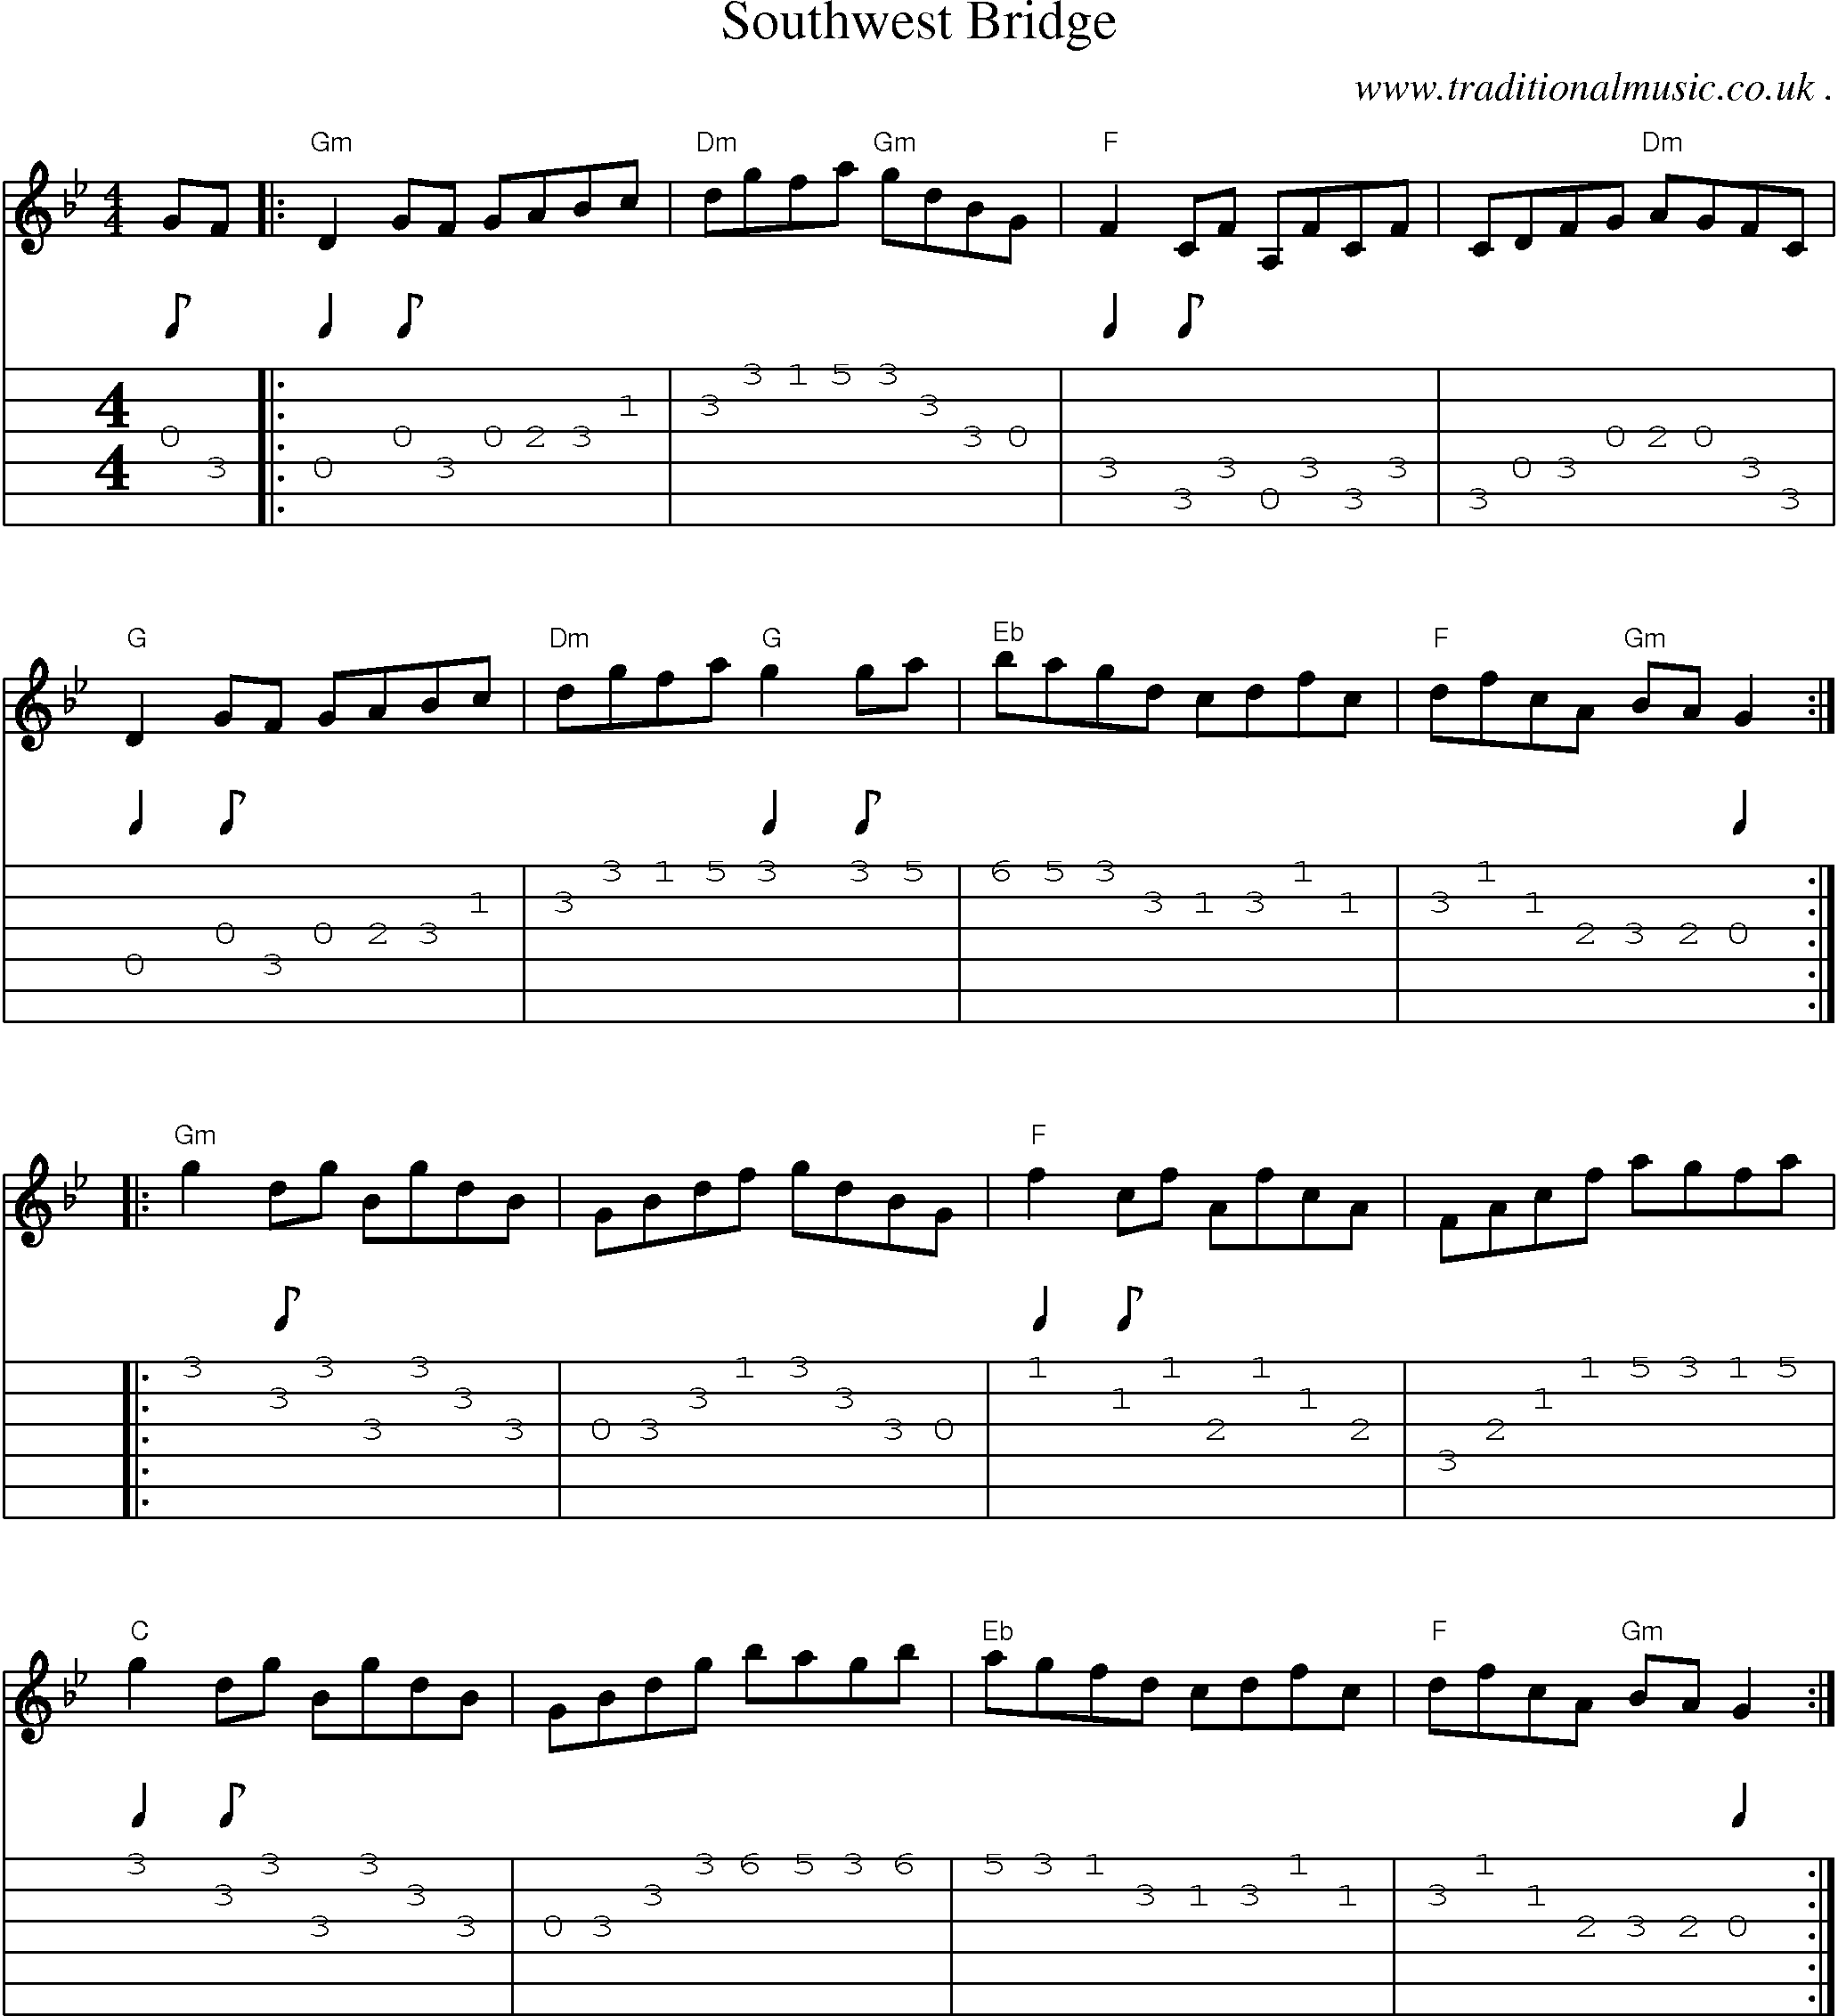 Music Score and Guitar Tabs for Southwest Bridge